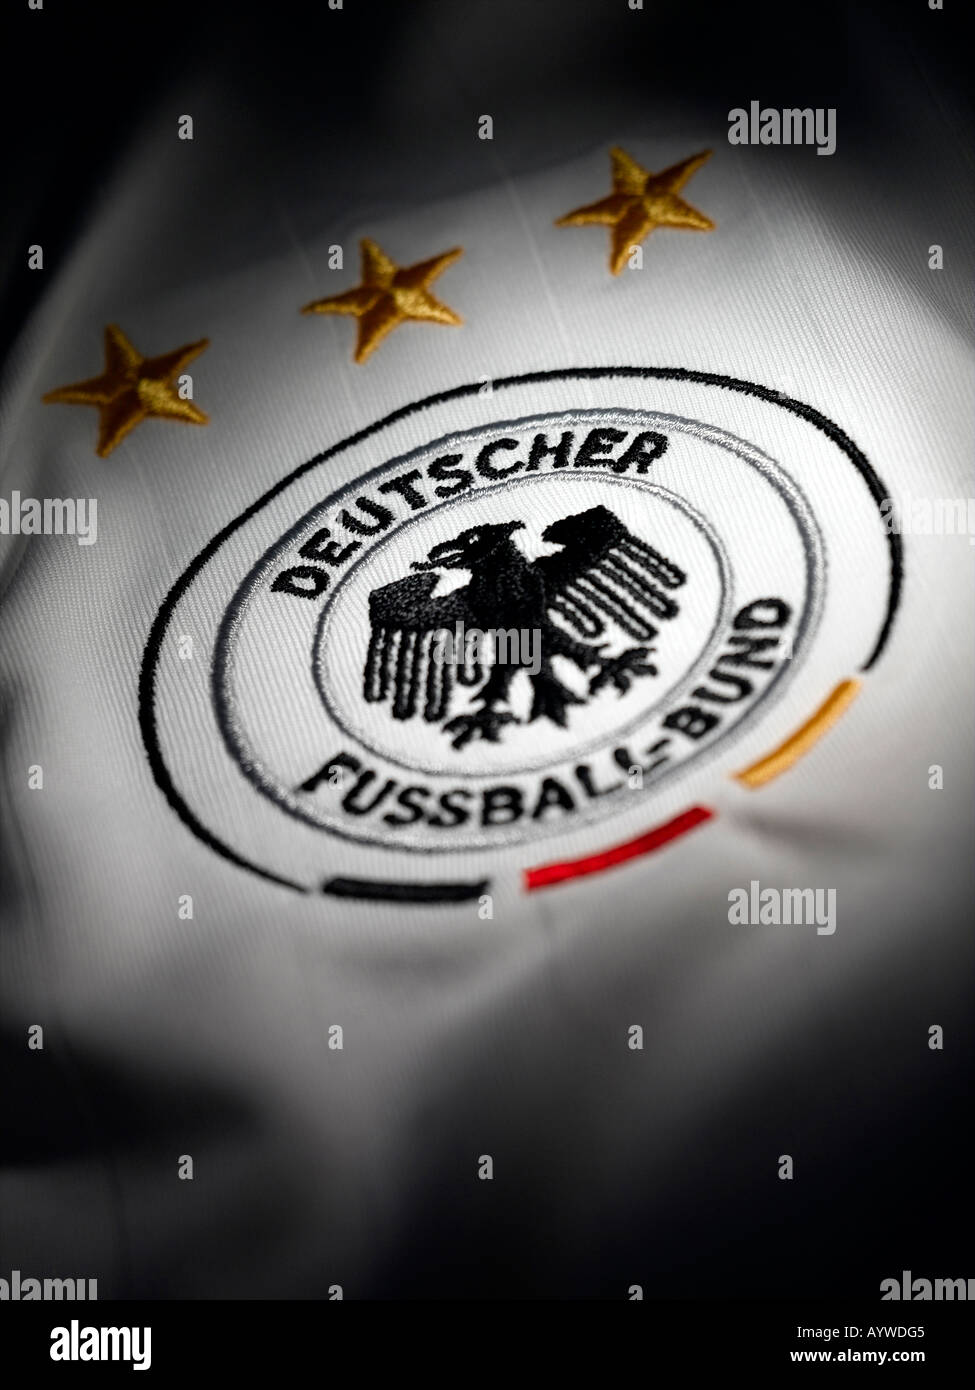 A close up of the badge on a German football shirt Stock Photo